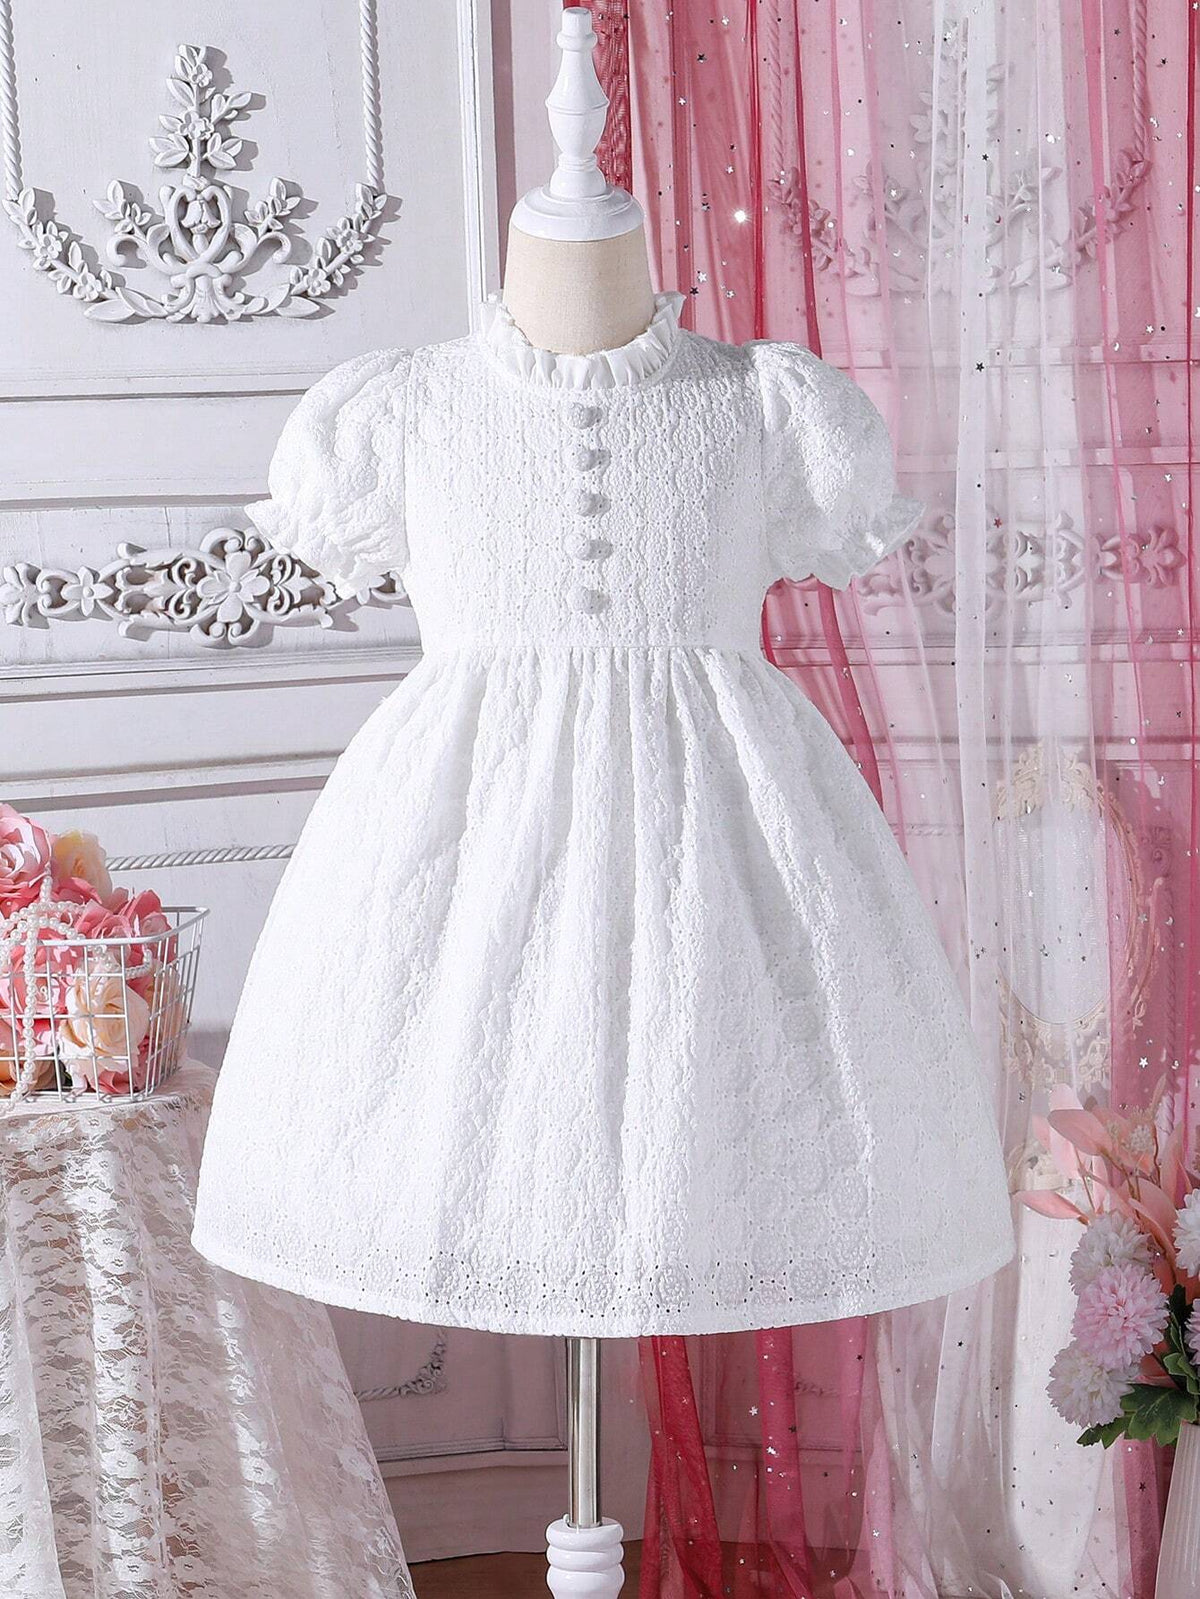 Young Girl Woven Pointelle Embroidery Elegant Dress With Ruffle Neckline And Puff Sleeves, Perfect For Birthday Party